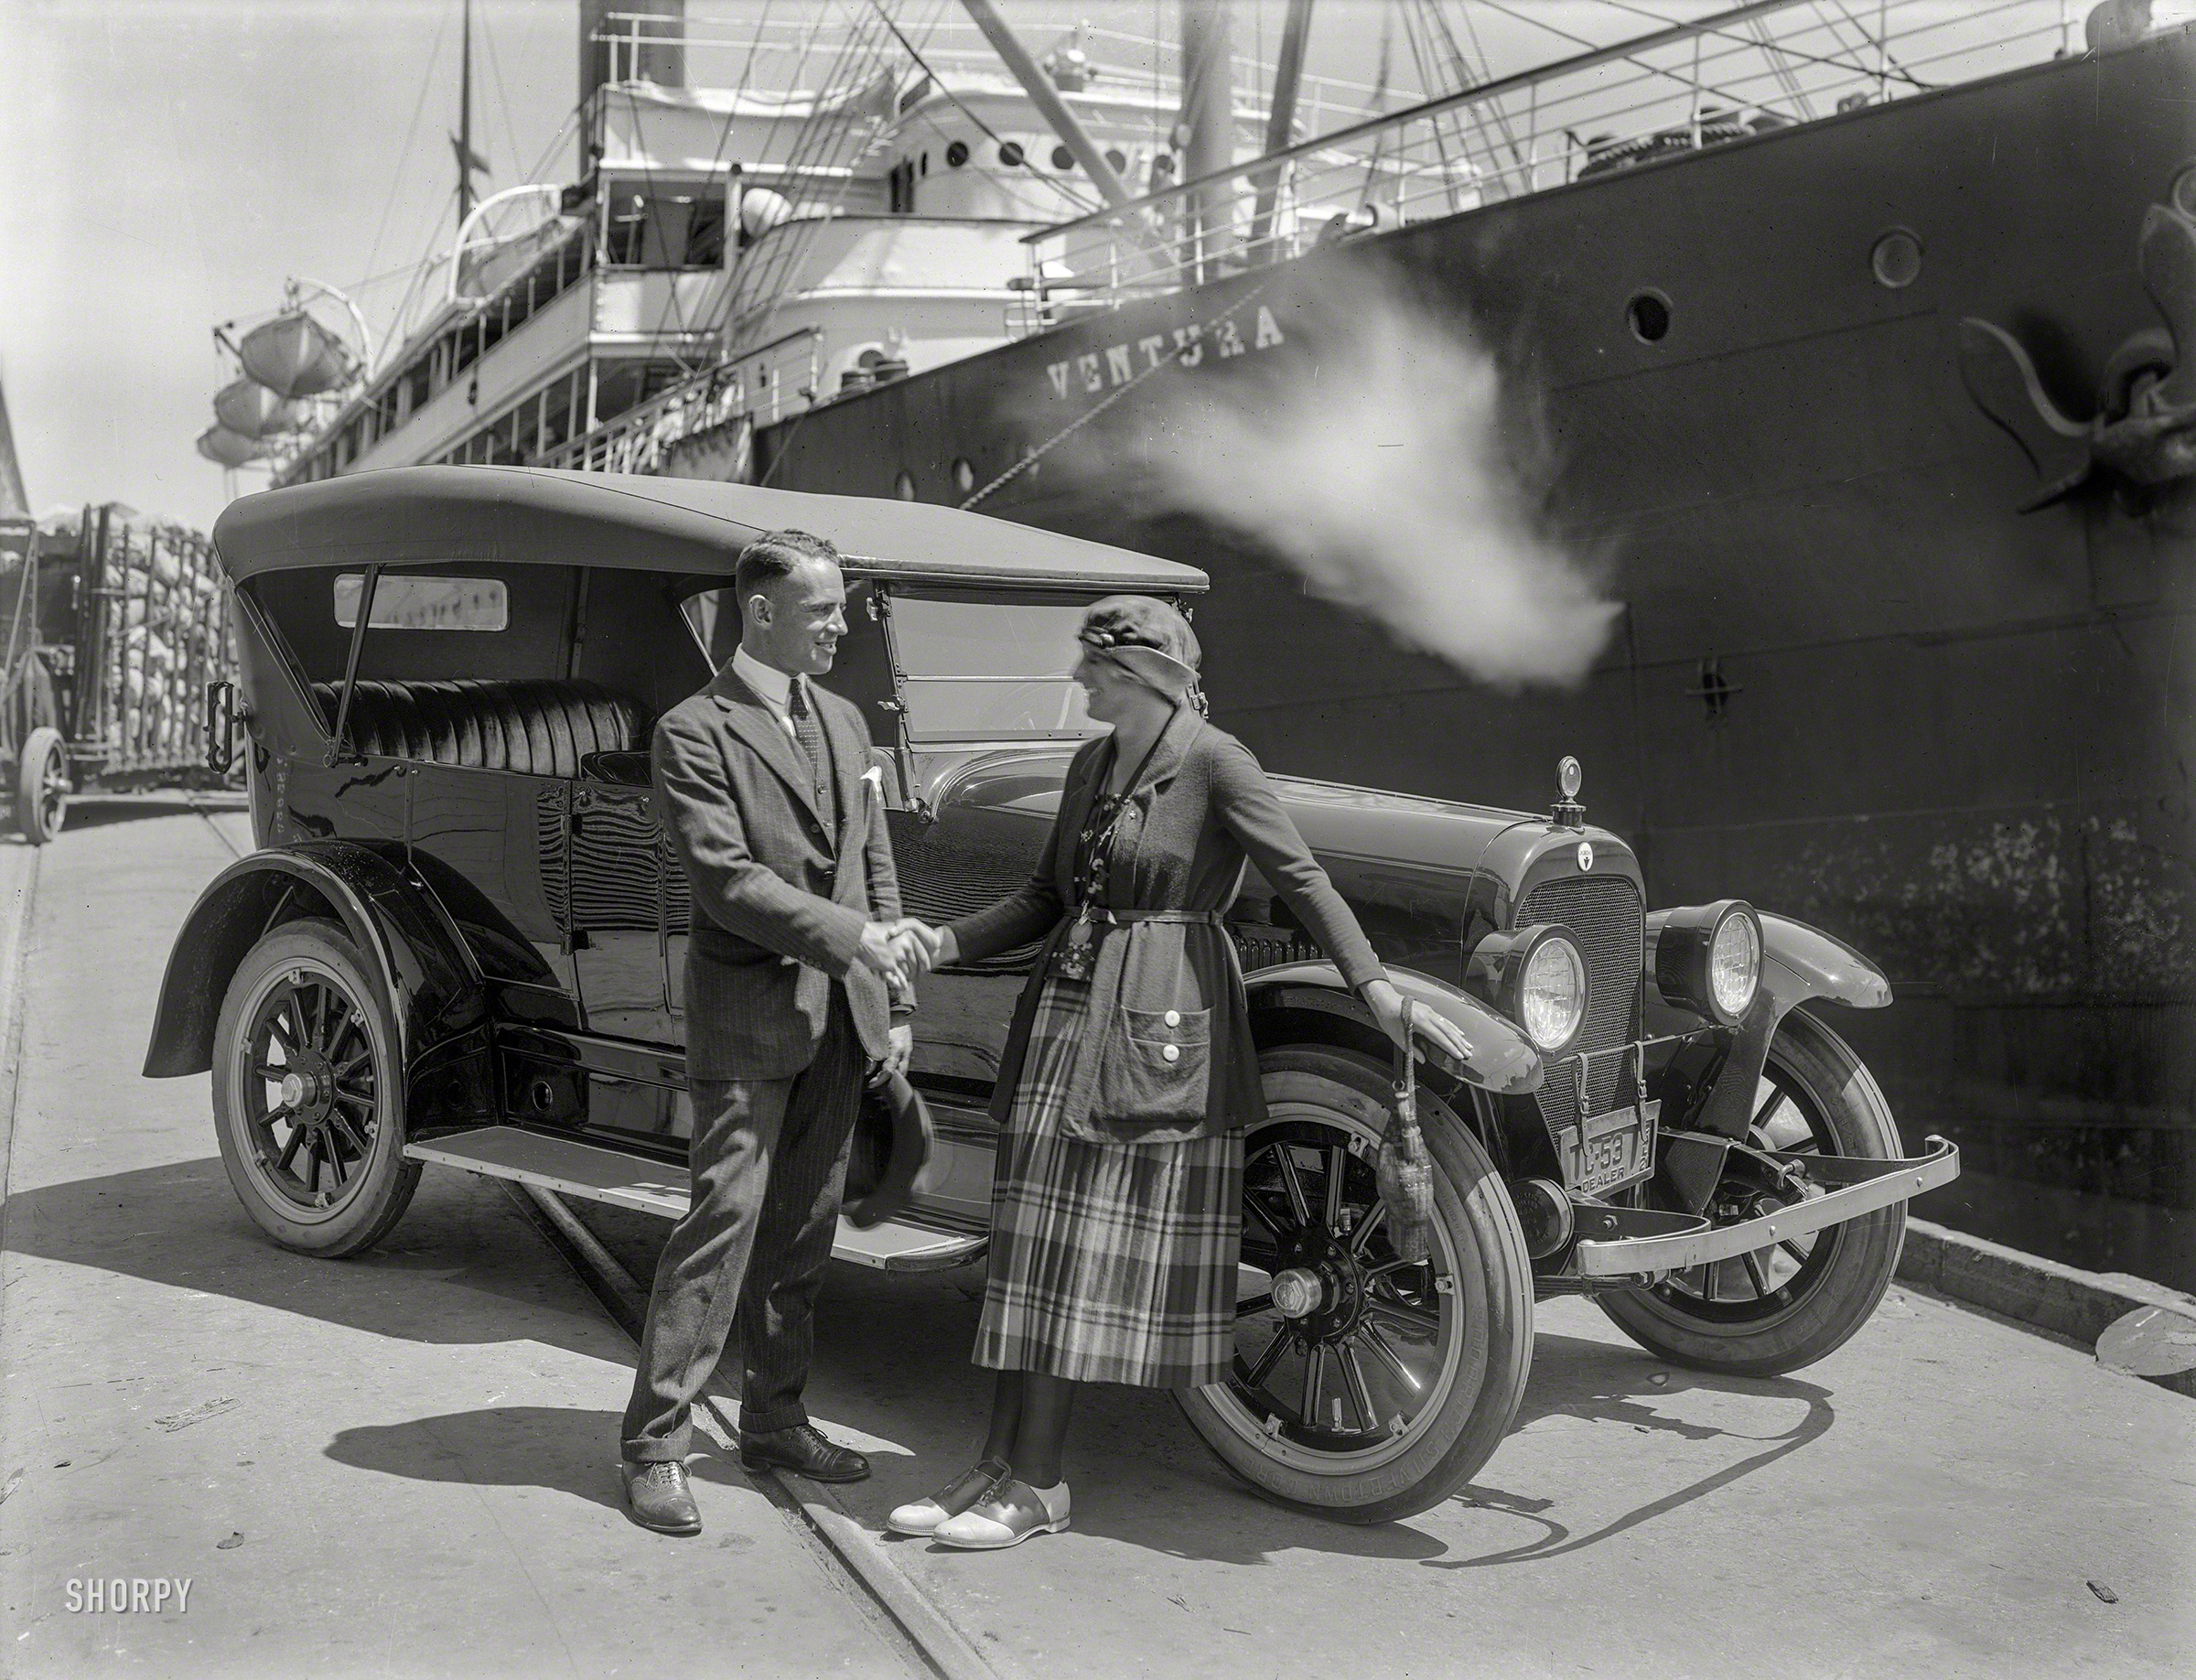 "Jordan touring car at San Francisco piers, 1921." The S.S. Ventura at dock. 8x6 inch glass negative, photographer unknown. View full size.